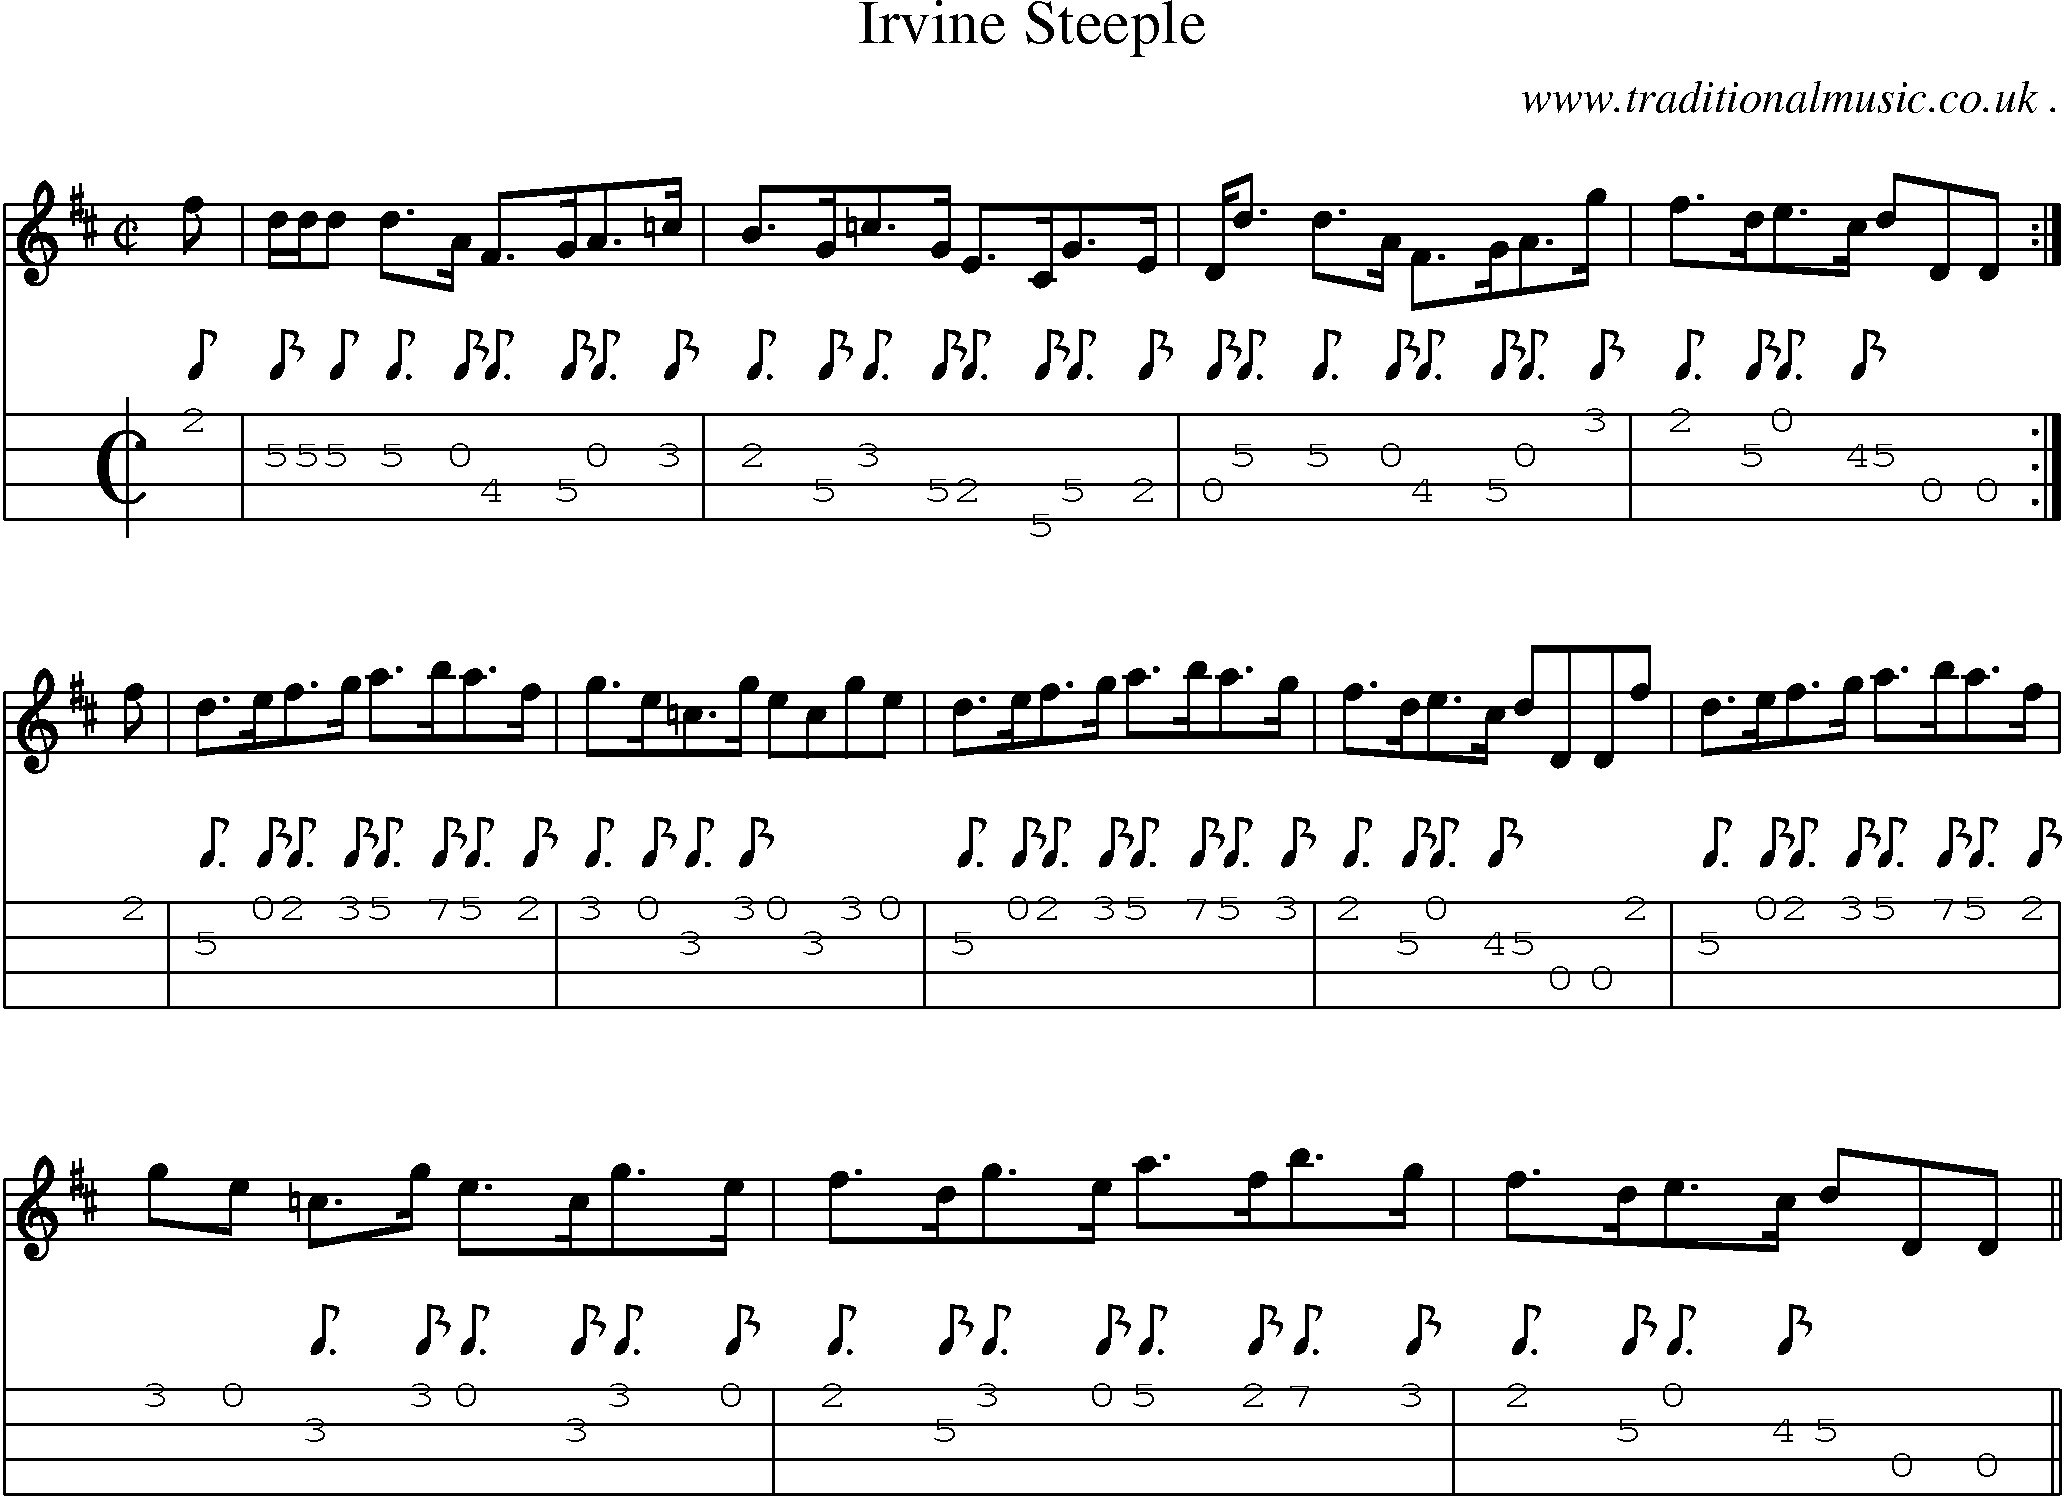 Sheet-music  score, Chords and Mandolin Tabs for Irvine Steeple